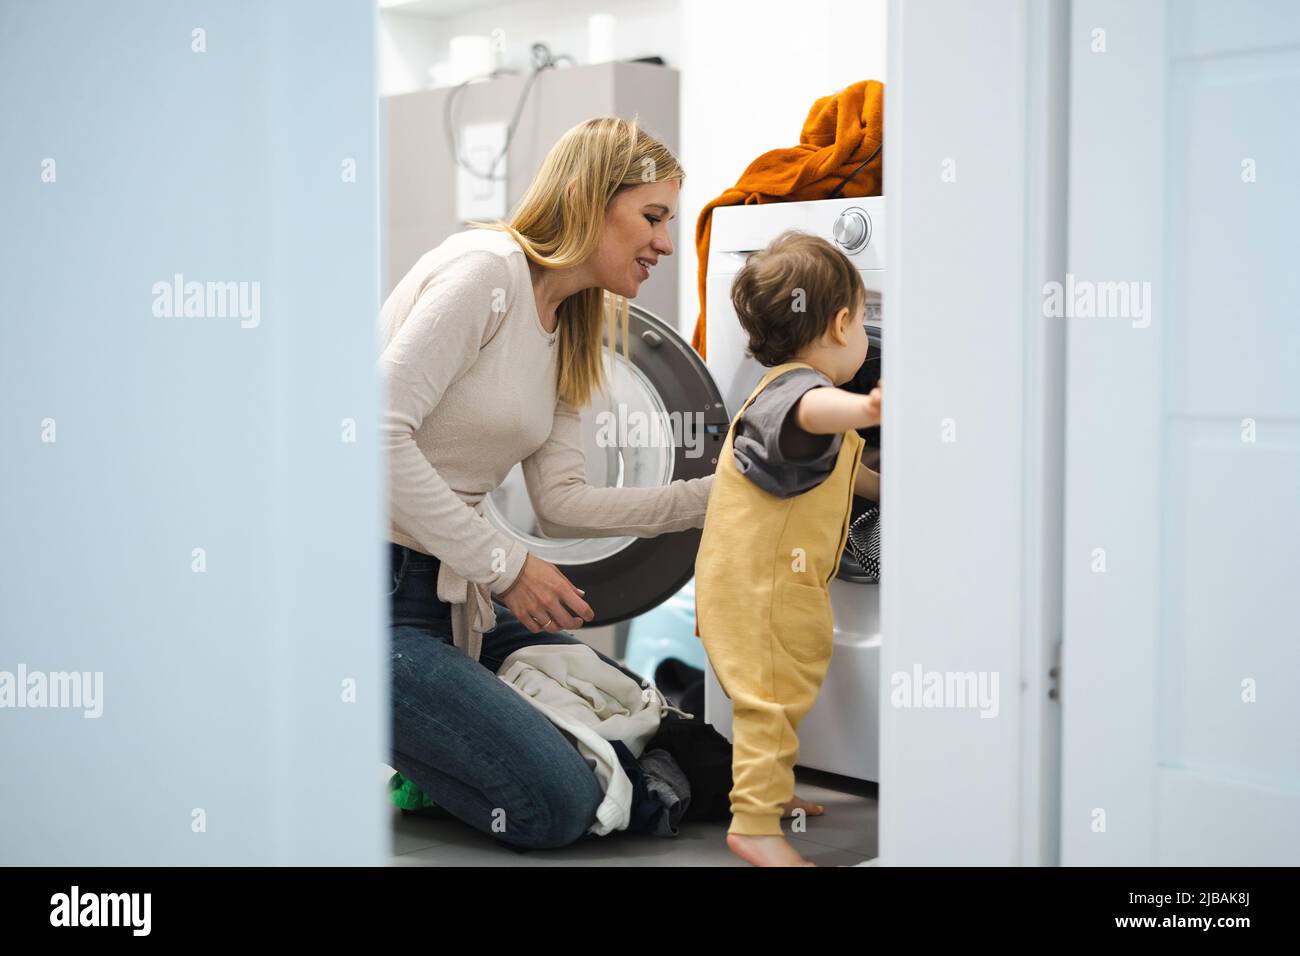 Mother and son loading washing machine Stock Photo